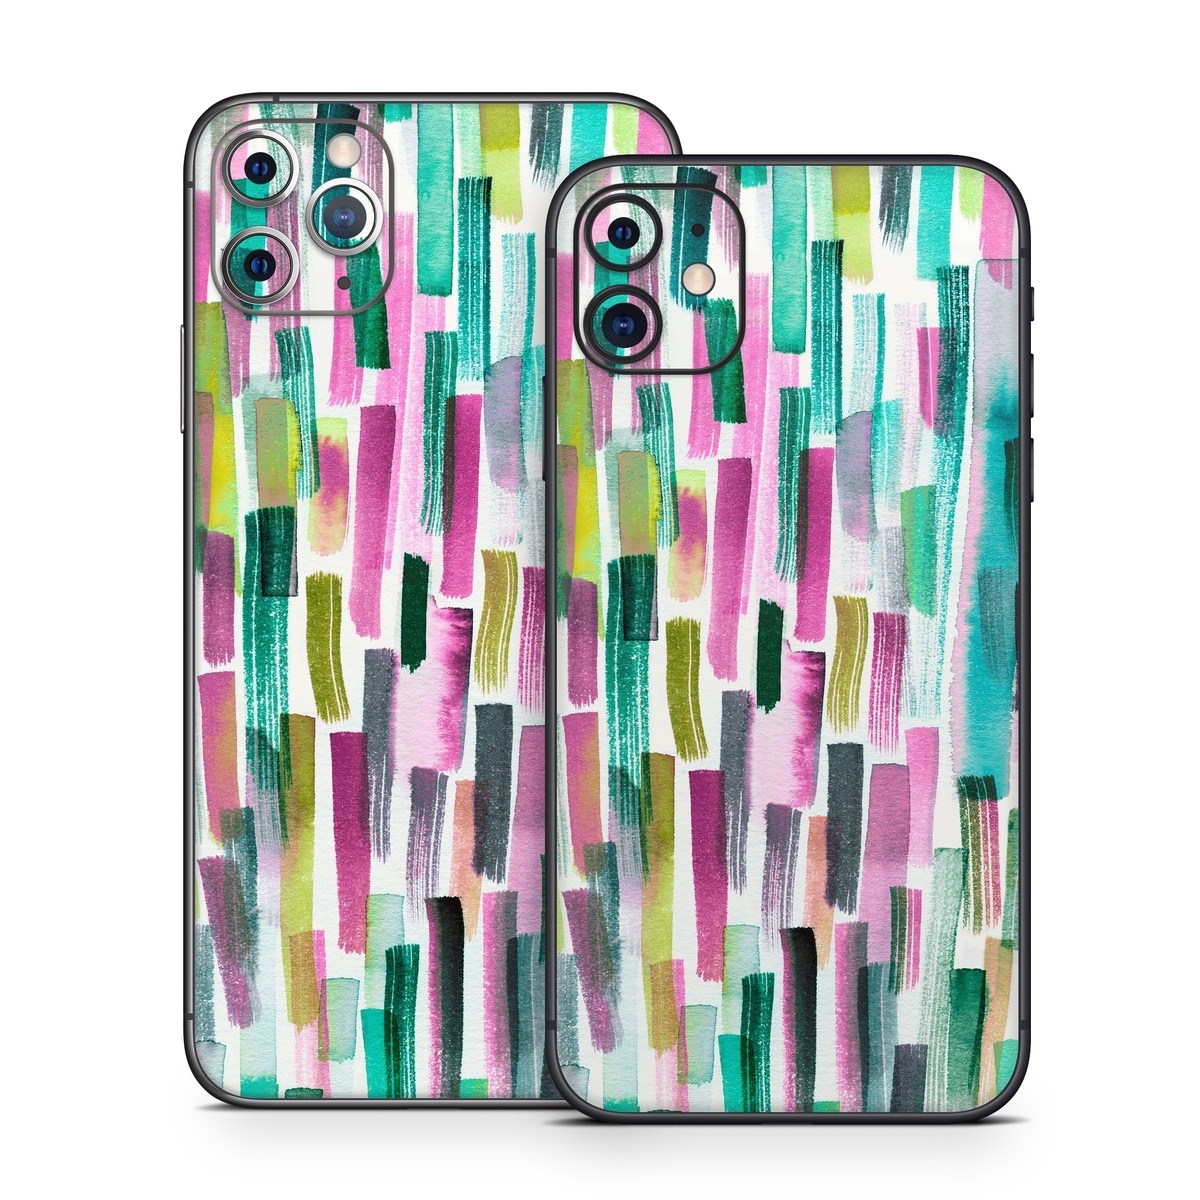 iPhone 11 Series Skin design of Line, Turquoise, Pink, Pattern, Design, Magenta, Colorfulness, with white, green, blue, pink, purple, black, blue colors